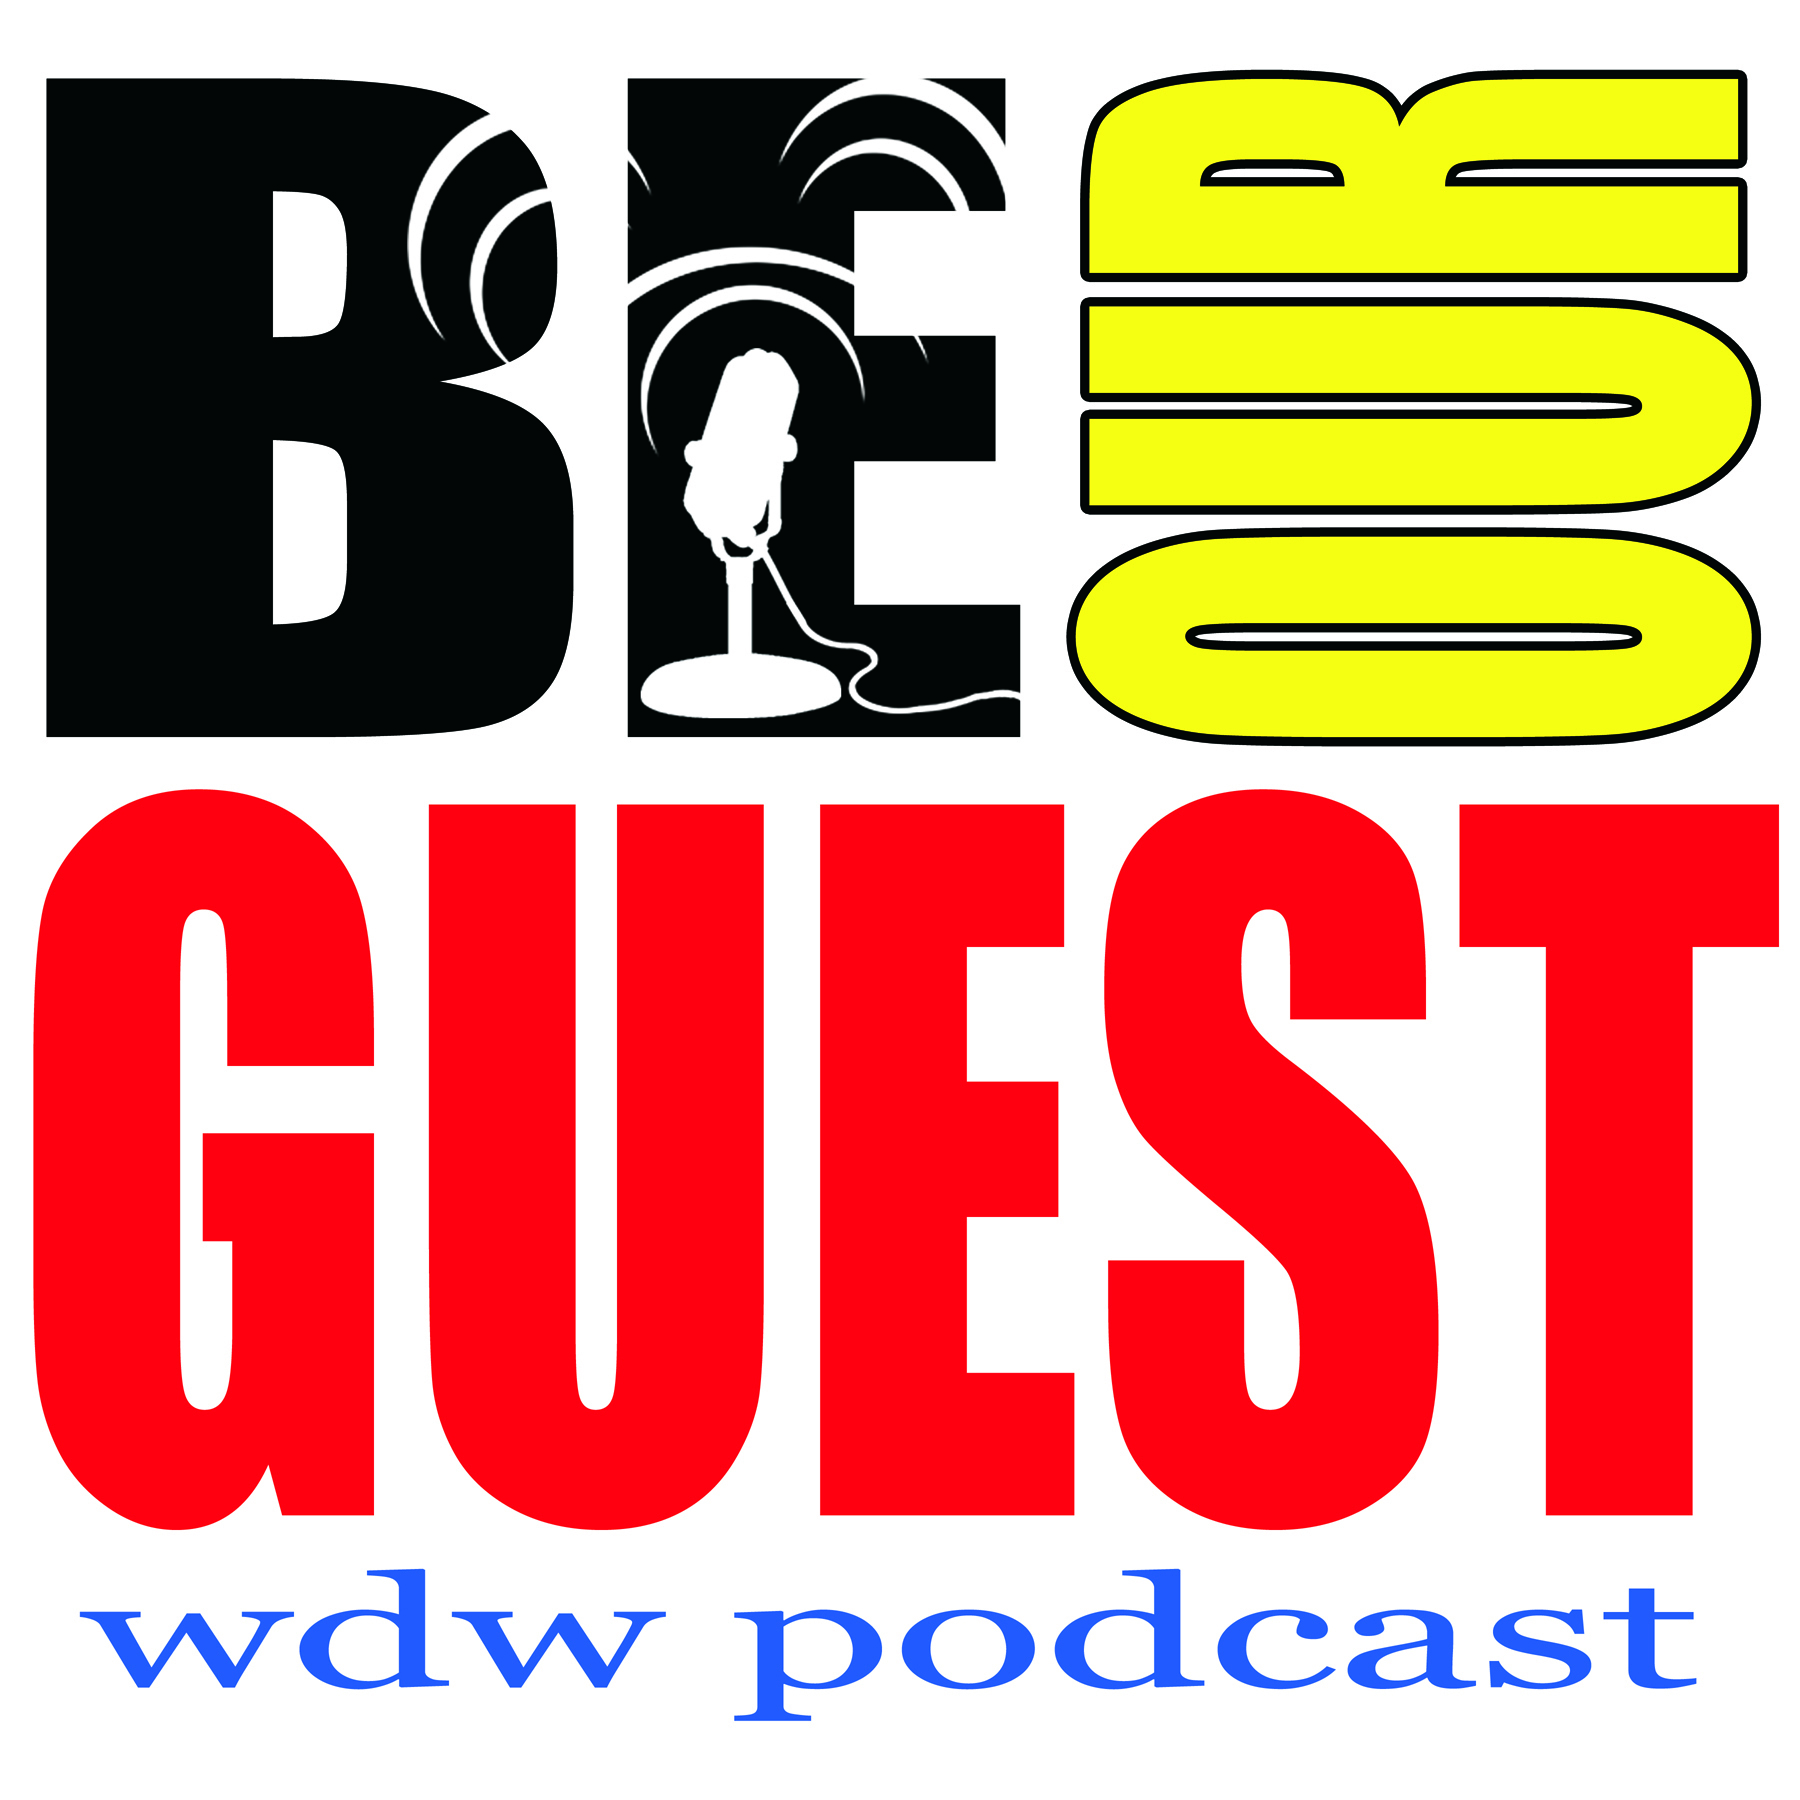 Episode 1507 - Be Our Guest Podcast Files - Undiscovered